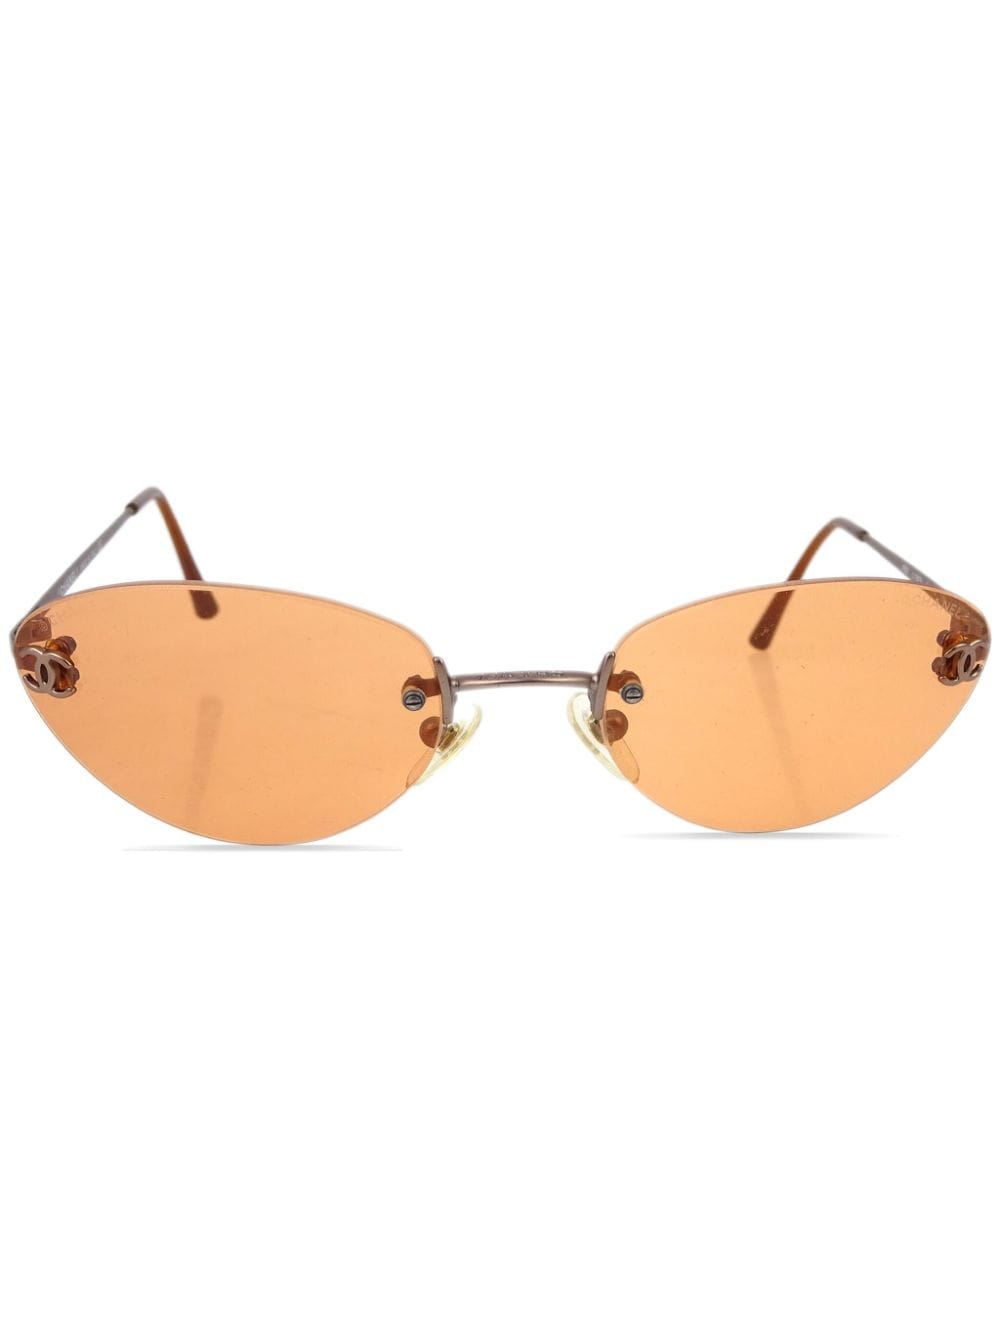 CHANEL Pre-Owned 1990-2000s CC rimless sunglasses - Brown